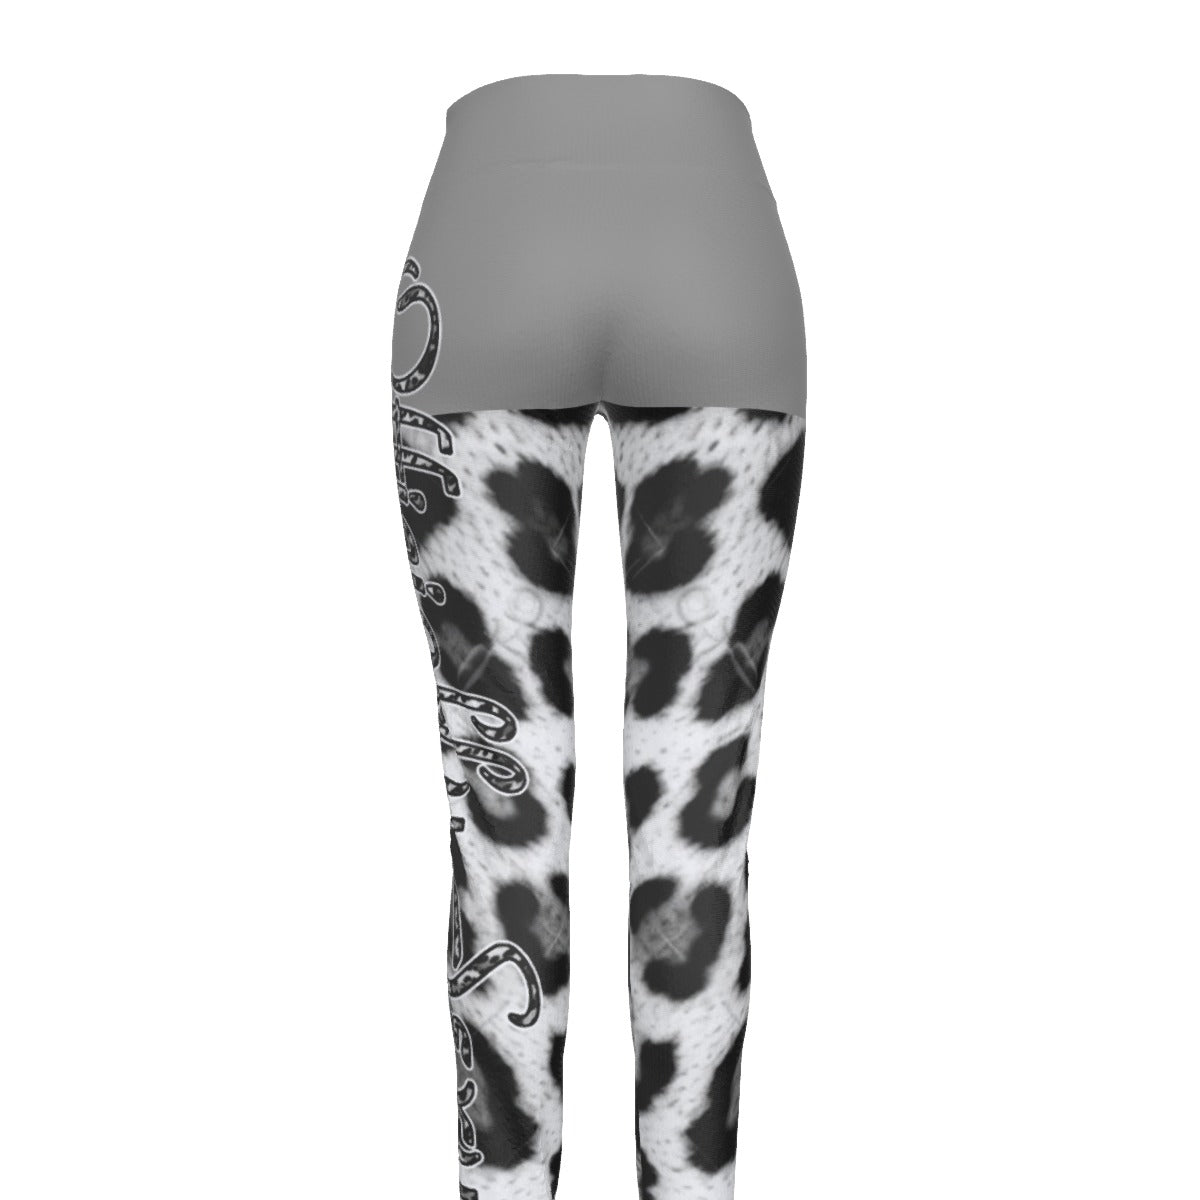 Officially Sexy Grey Snow Leopard Print Collection Women's Grey High Waist Booty Popper Leggings #2 (English) 3